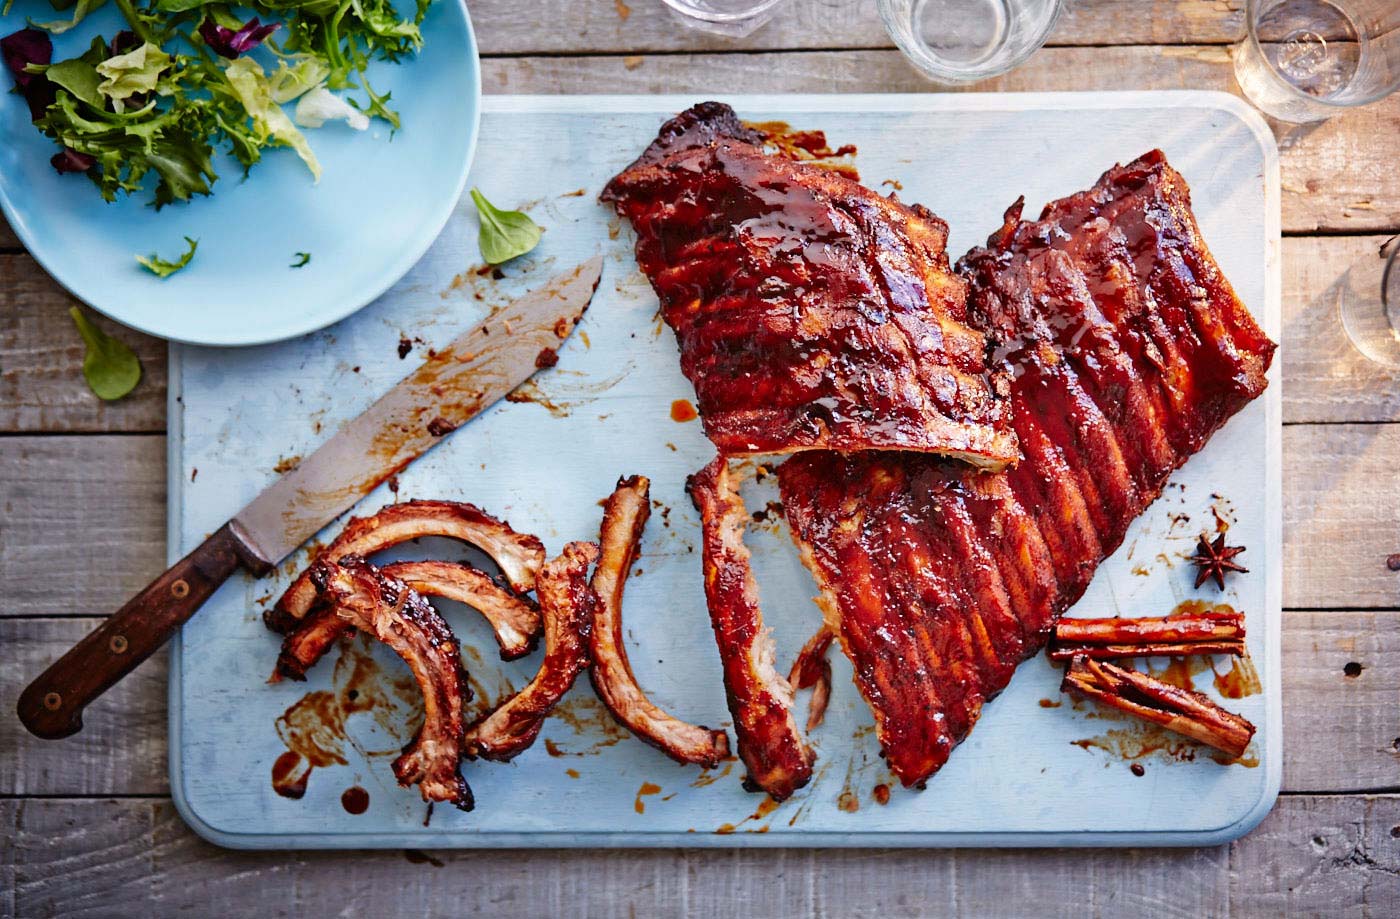 🍴 If You Eat 8/25 of These Foods With a Fork, You’re Forking Ridiculous Barbecue ribs